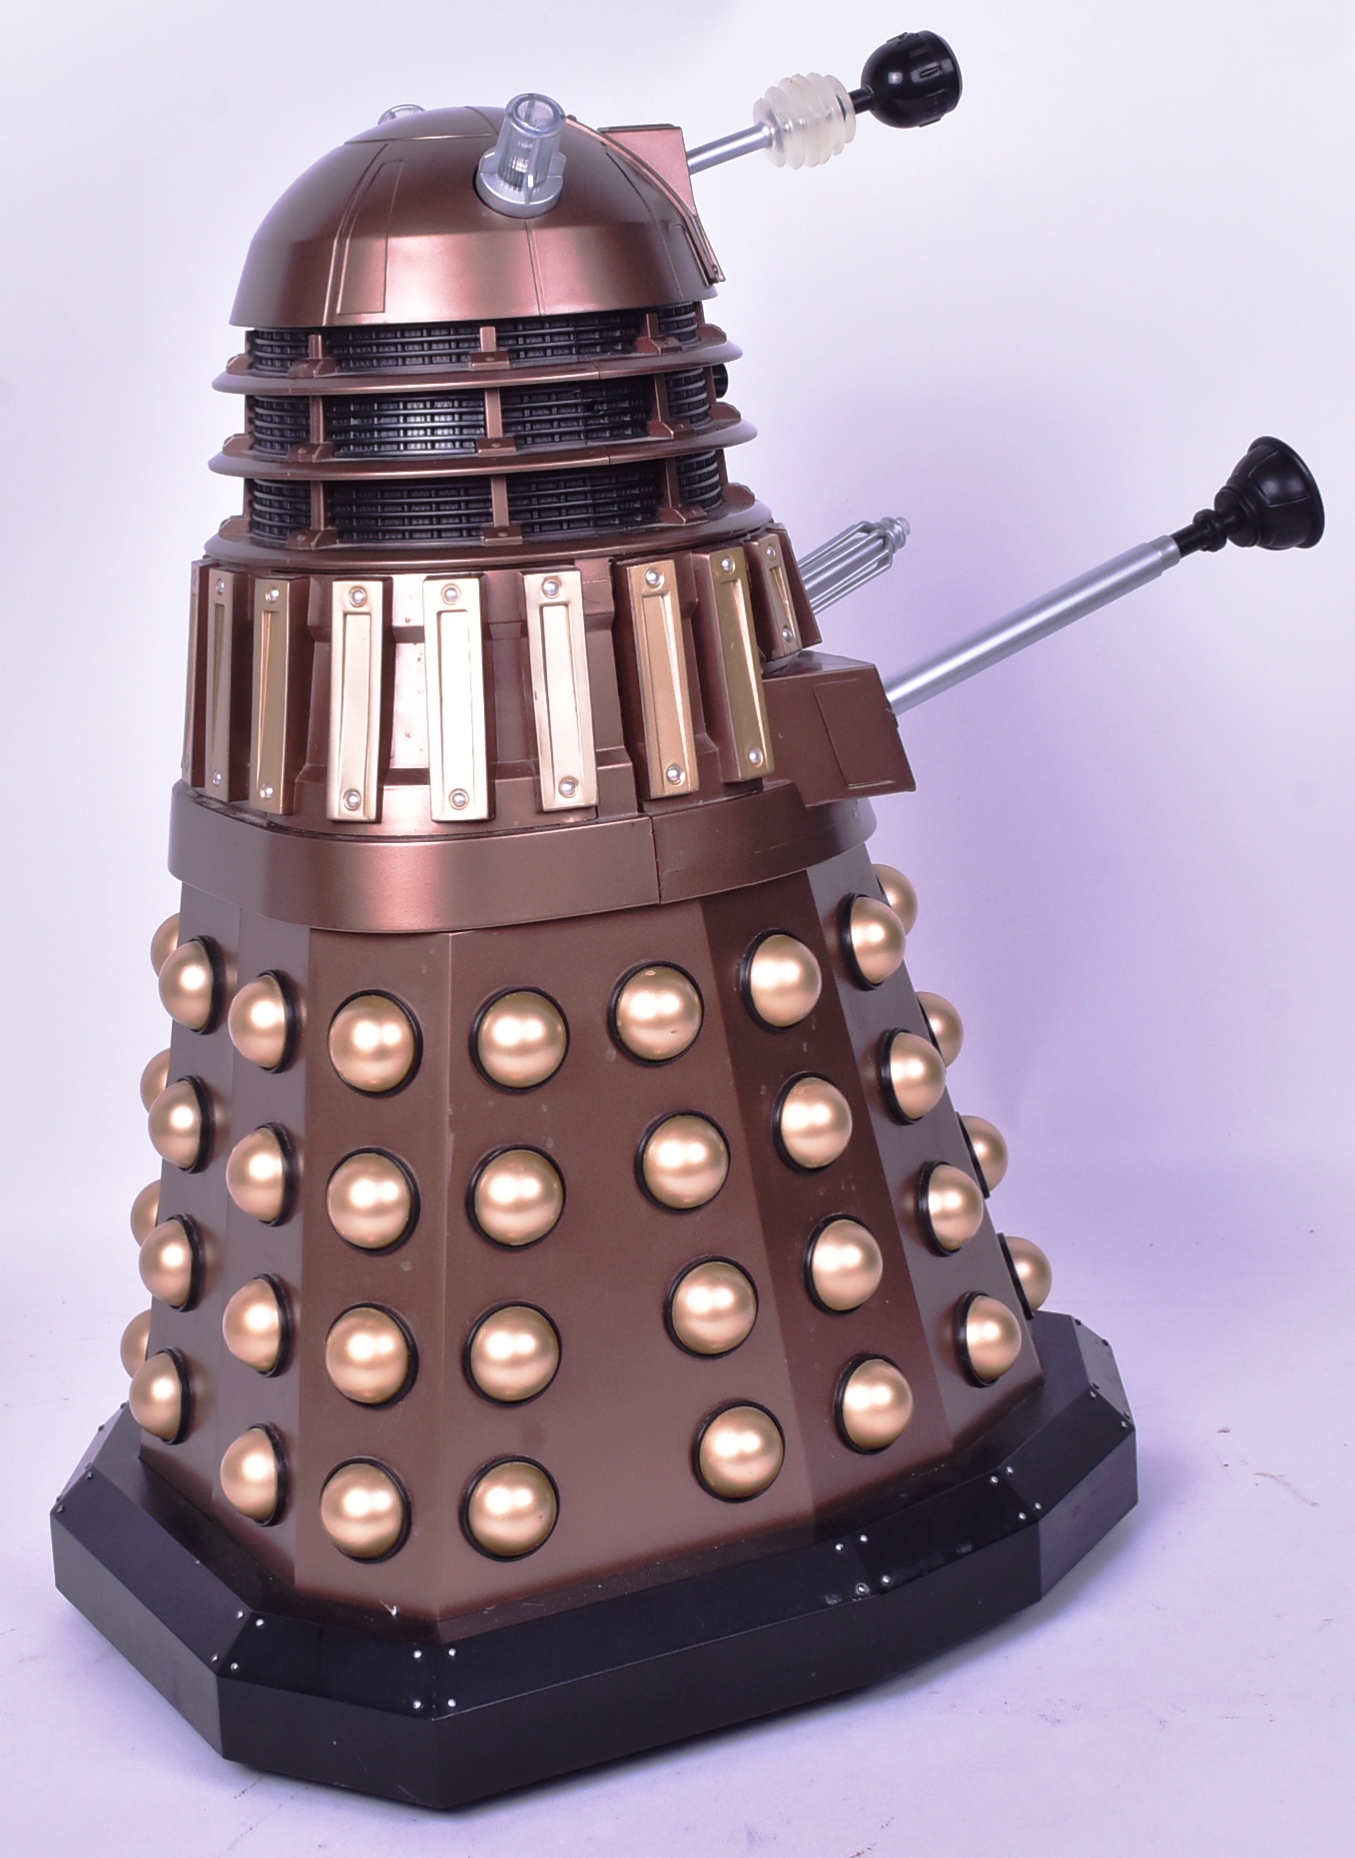 DOCTOR WHO - CHARACTER OPTONS - 18" SCALE LARGE RC DALEK - Image 3 of 5